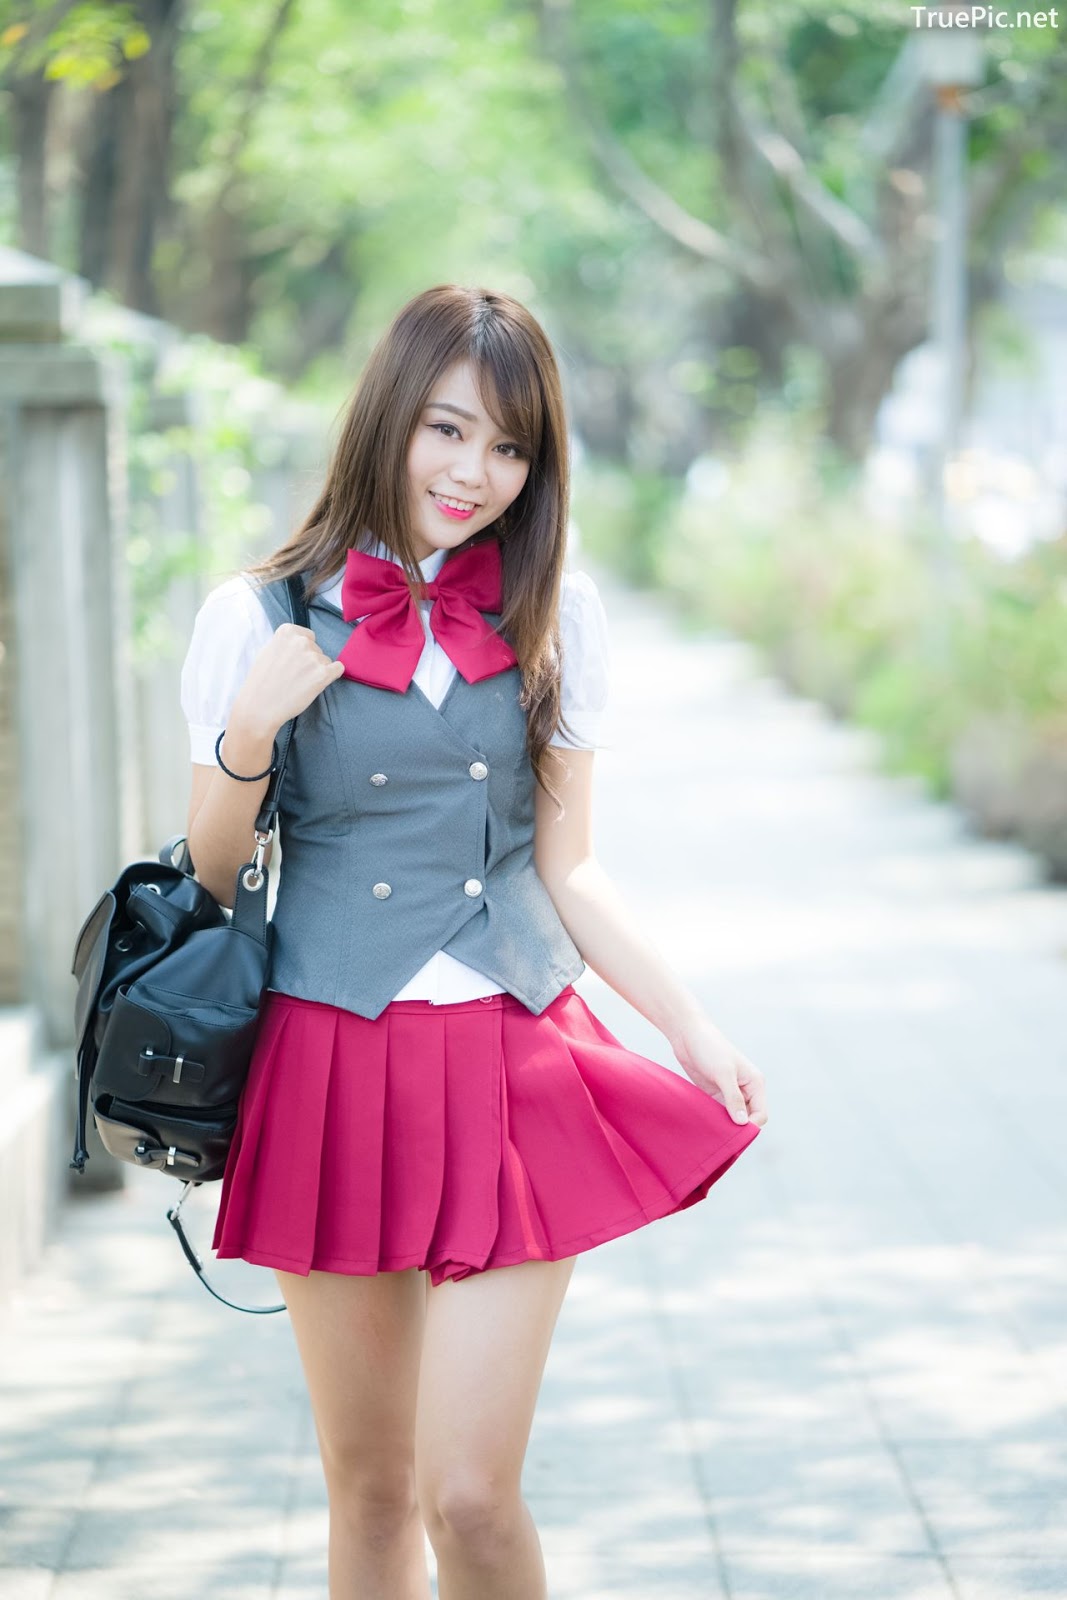 Image-Taiwan-Social-Celebrity-Sun-Hui-Tong-孫卉彤-A-Day-as-Student-Girl-TruePic.net- Picture-76